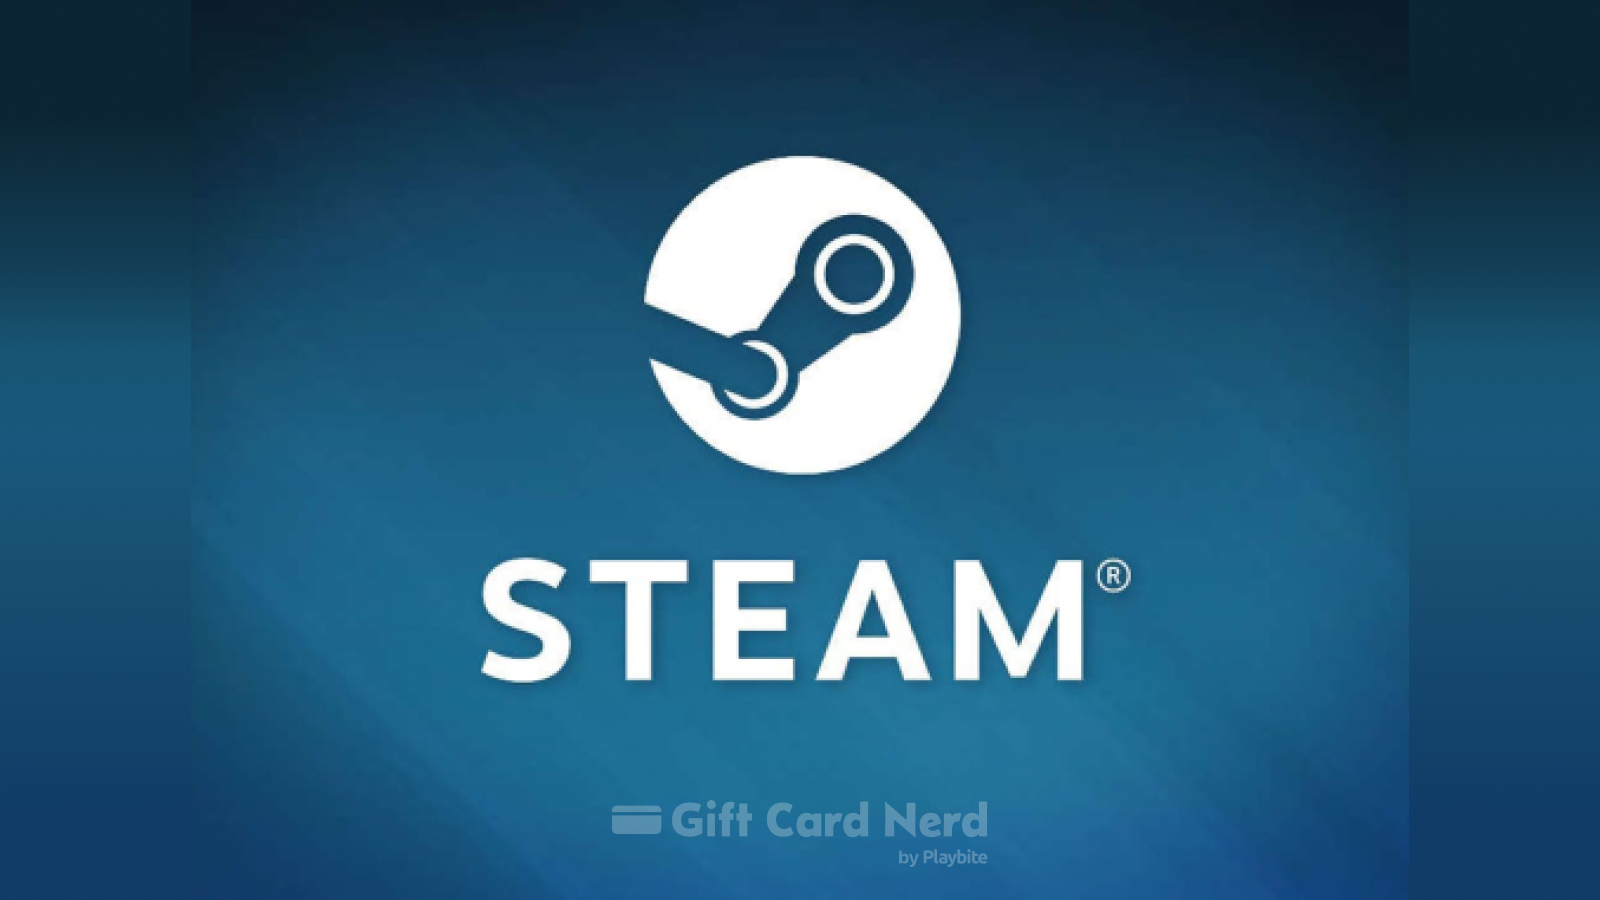 Does Walmart Sell Steam Gift Cards?